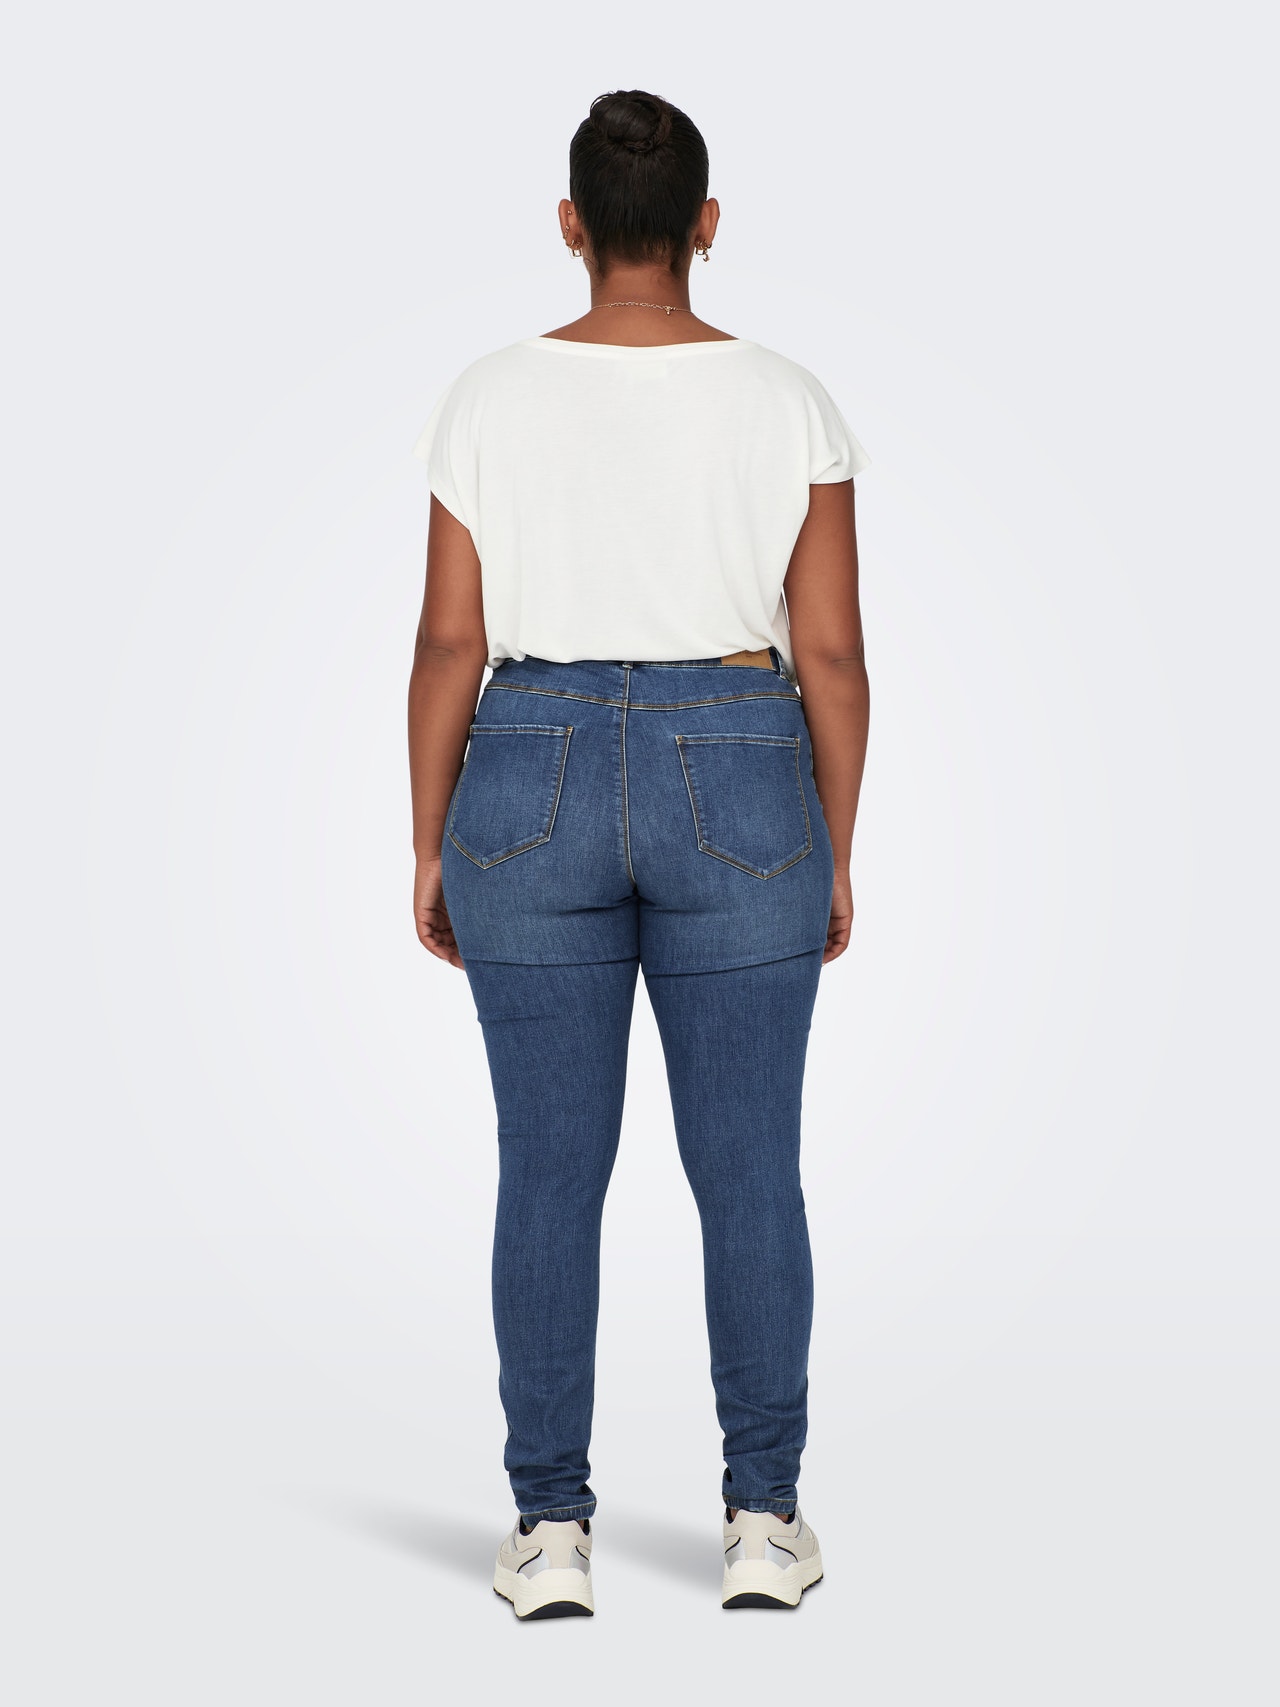 ONLY Jeans Skinny Fit Taille classique -Medium Blue Denim - 15219189